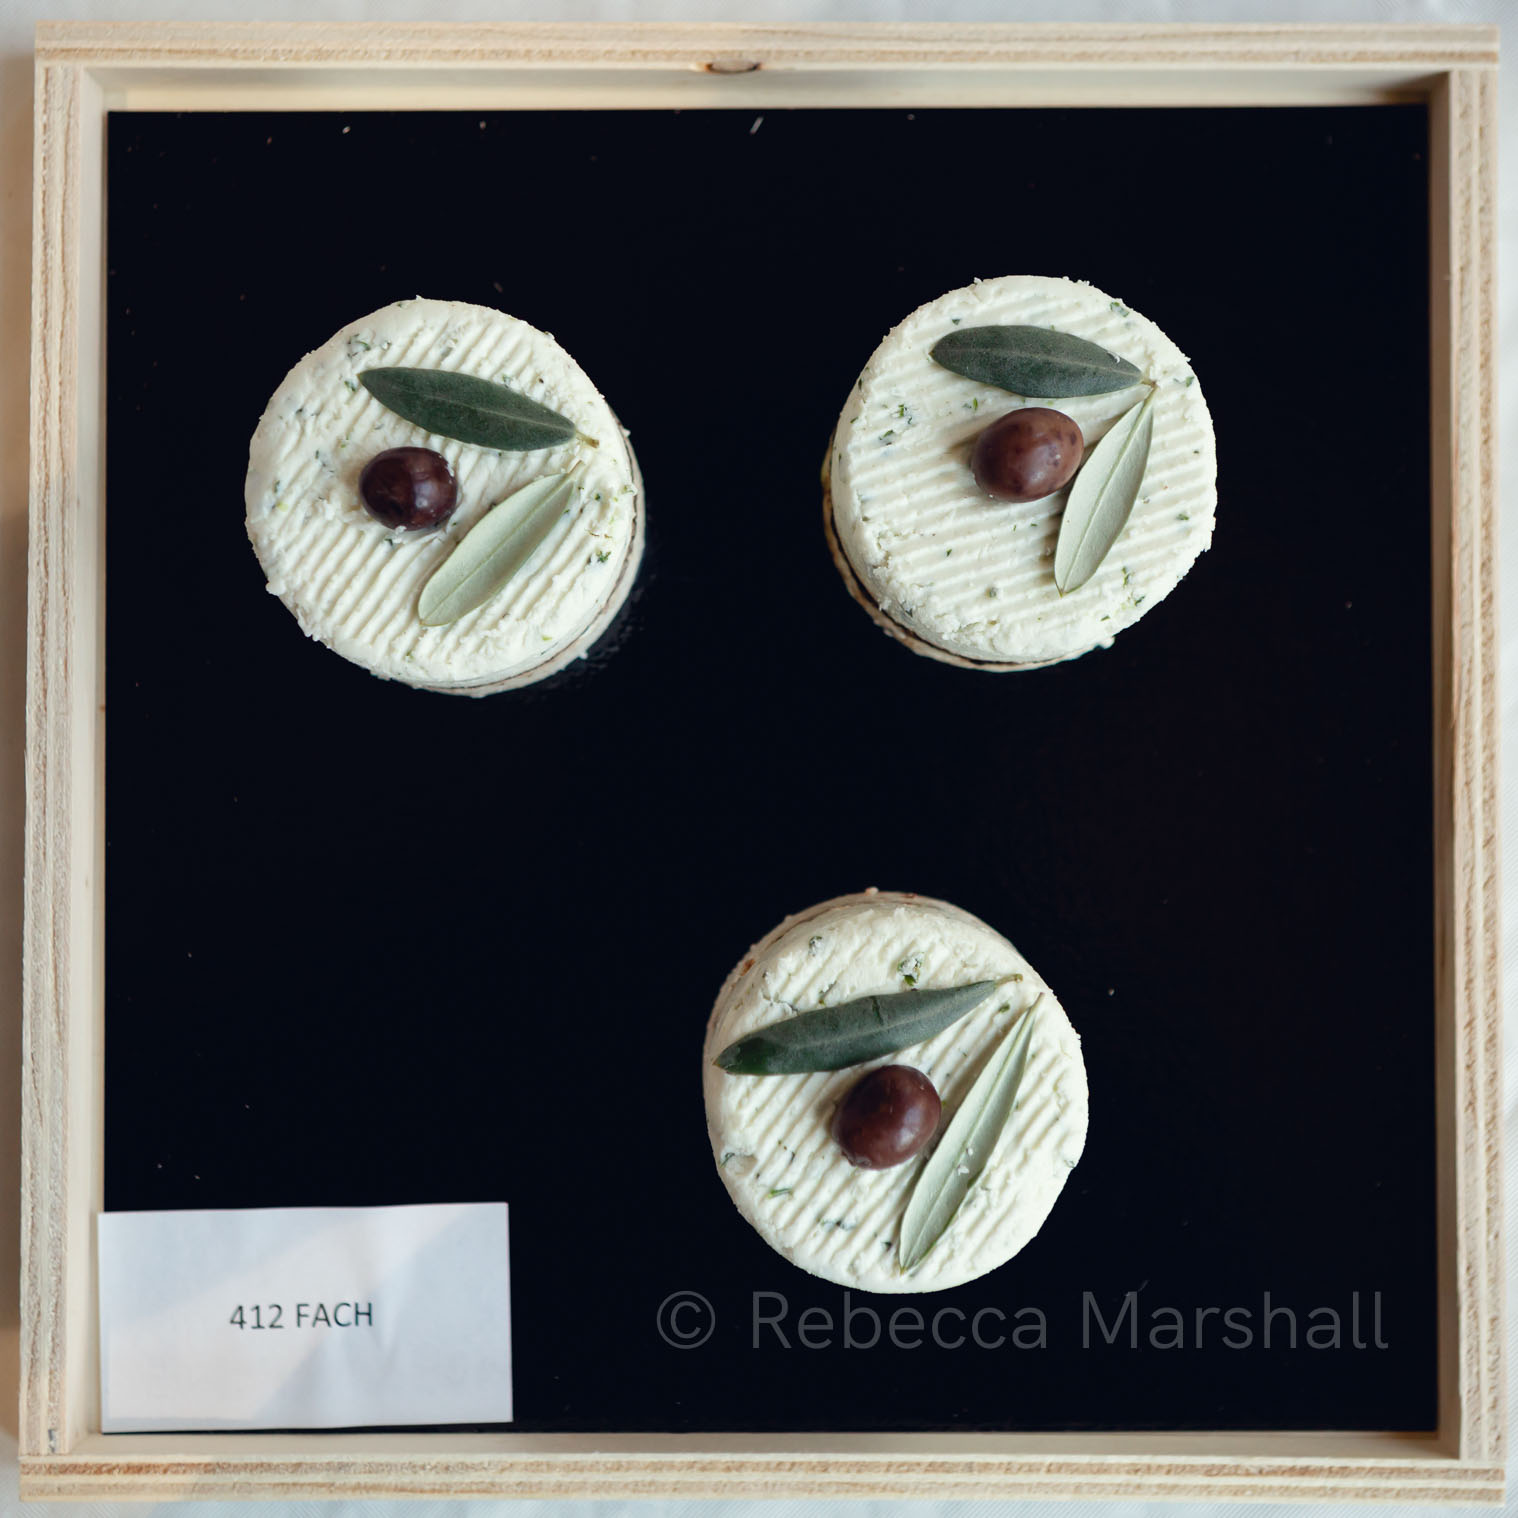 Photograph of 3 round cheeses with olives on top